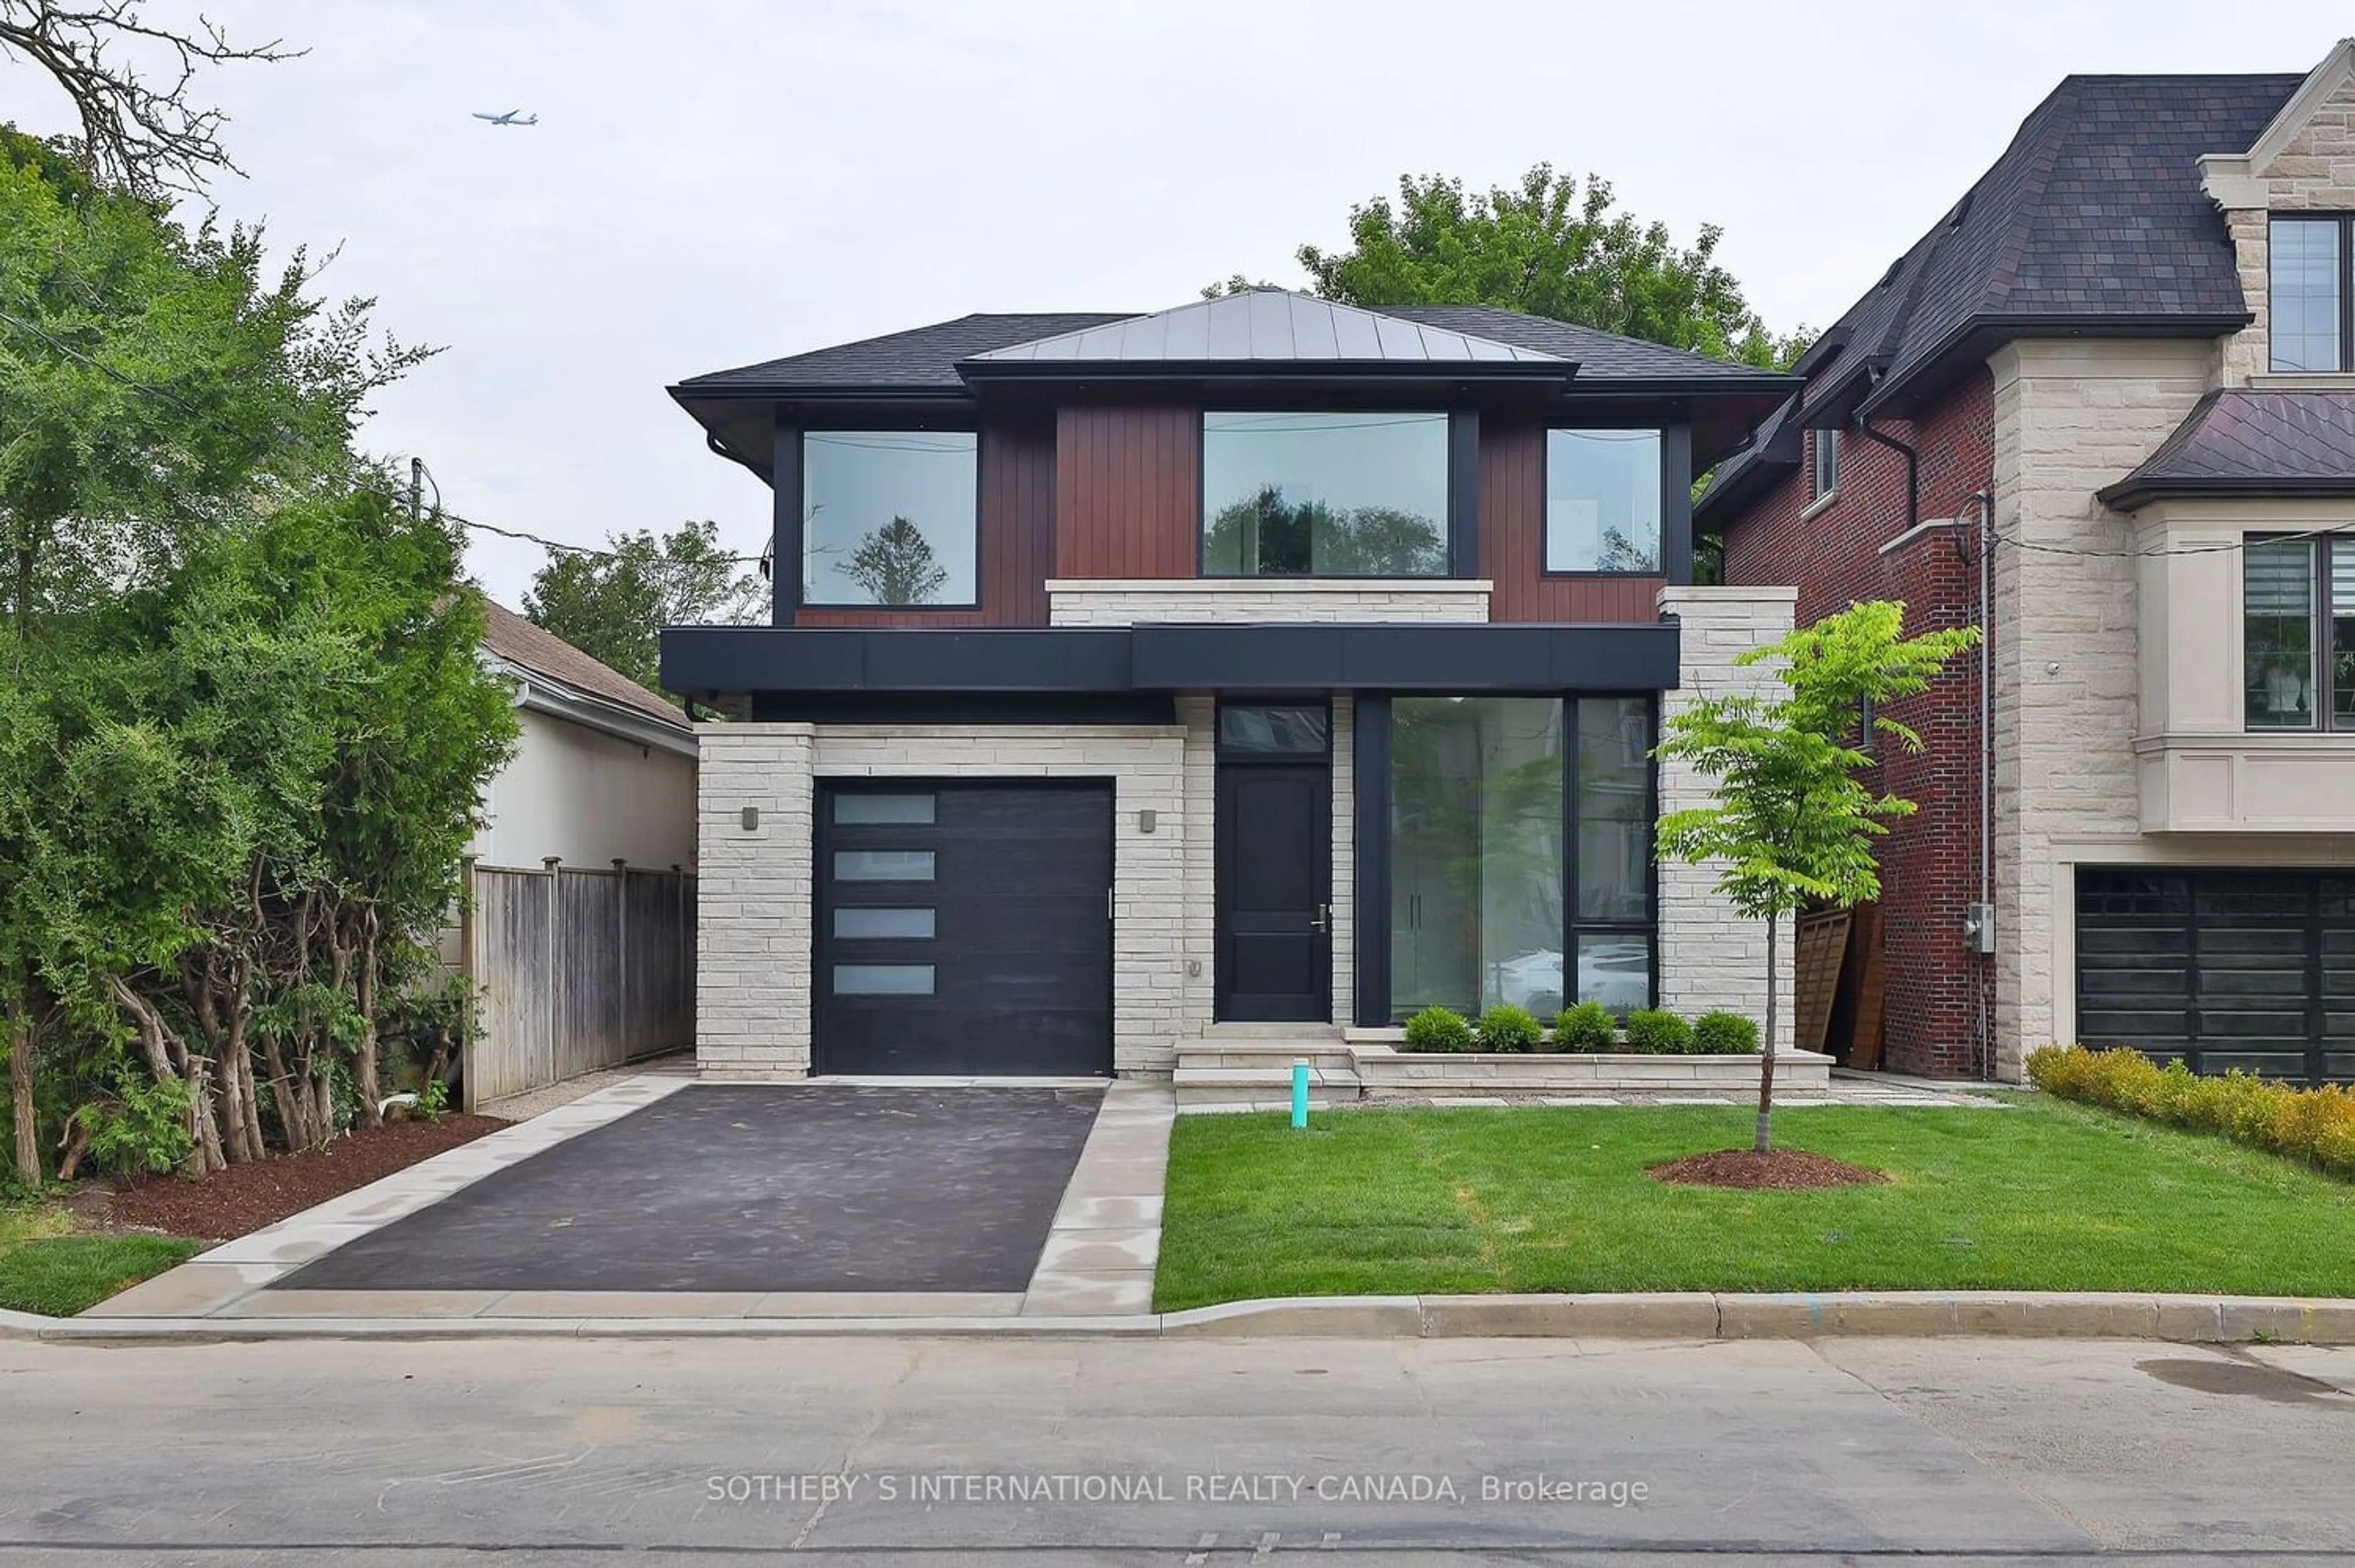 Home with brick exterior material for 220 Harlandale Ave, Toronto Ontario M2N 1P7